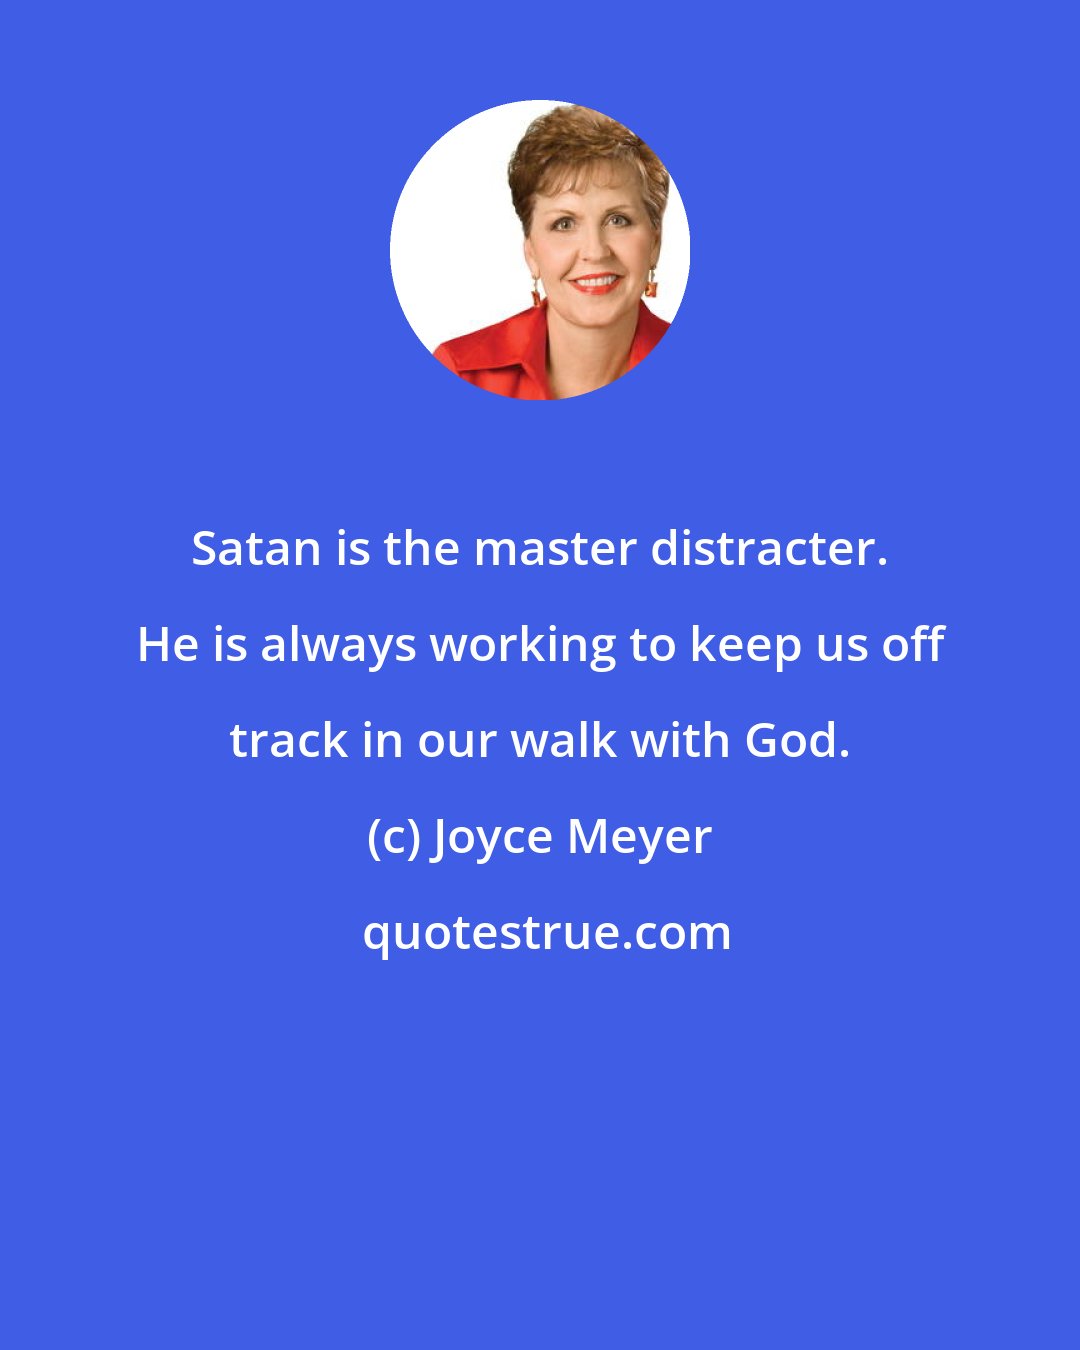 Joyce Meyer: Satan is the master distracter. He is always working to keep us off track in our walk with God.